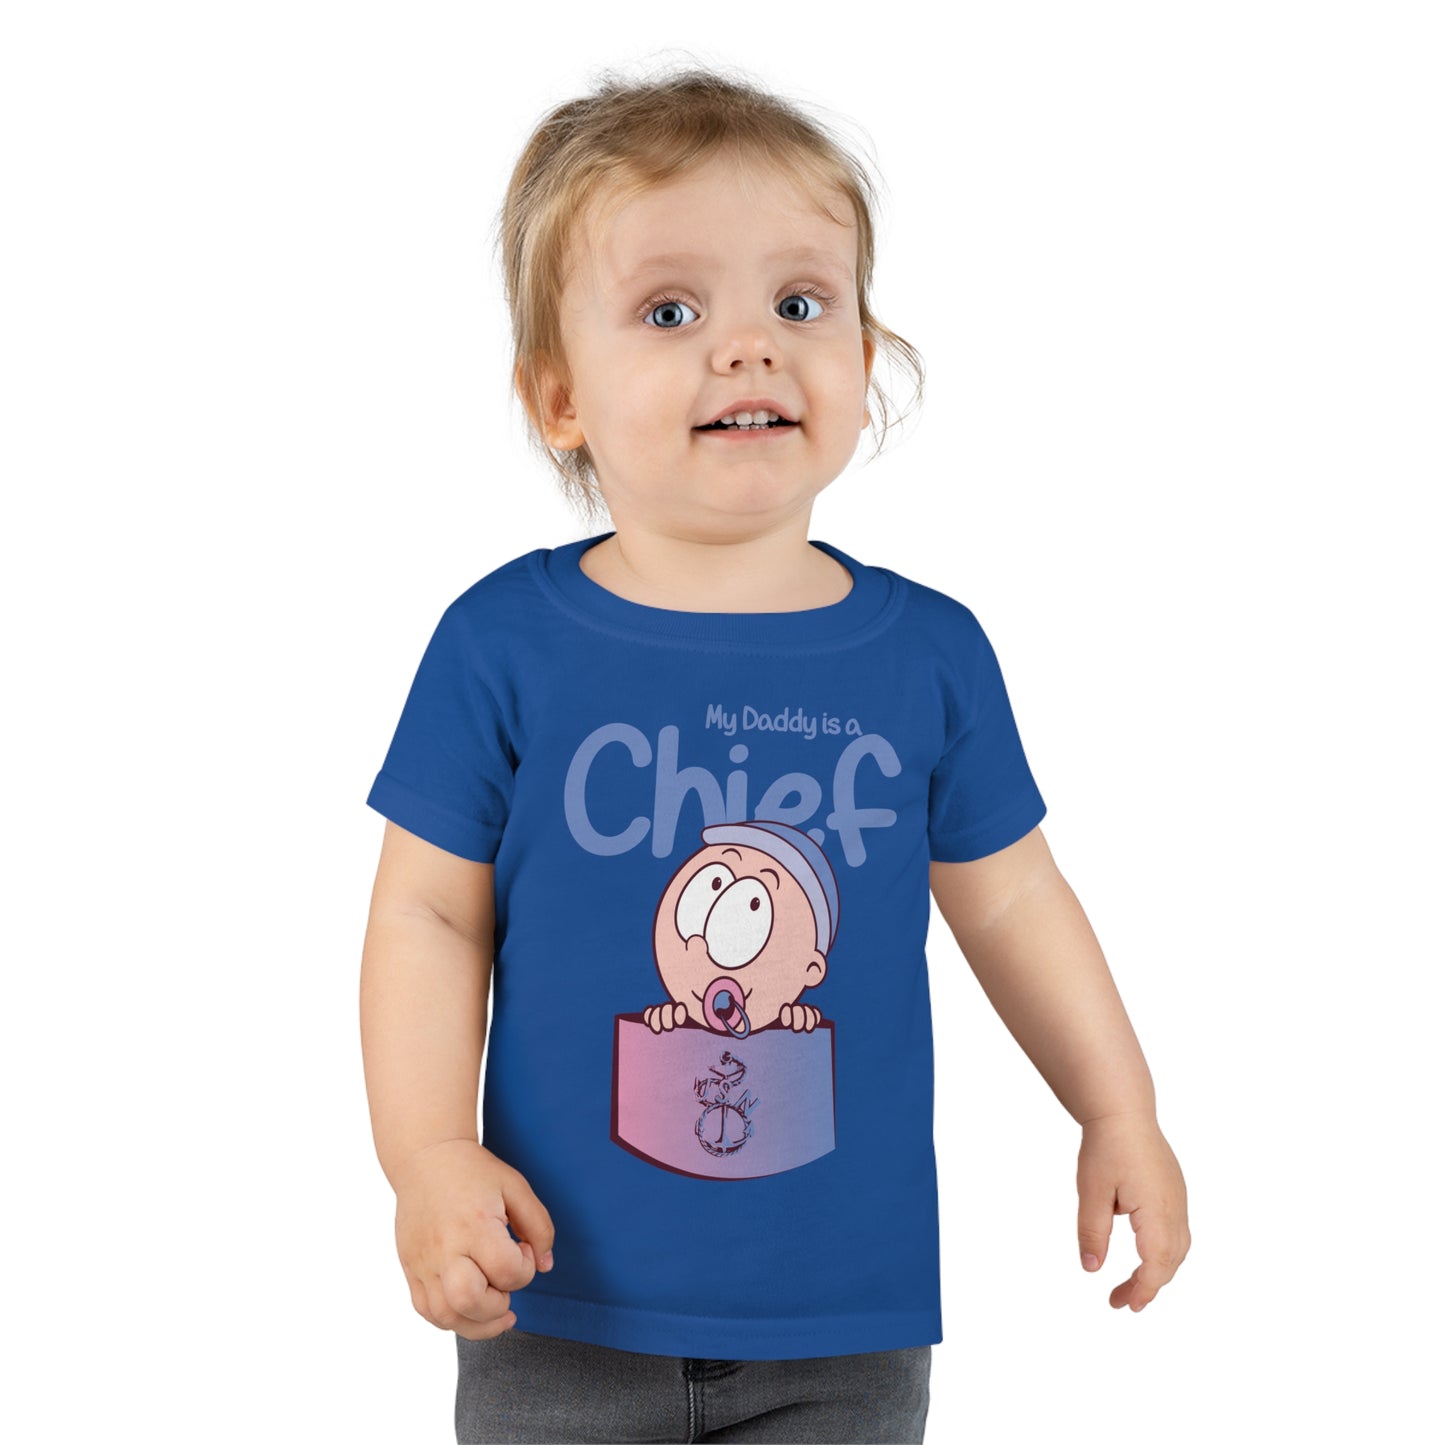 My Daddy is Chief Toddler T-shirt